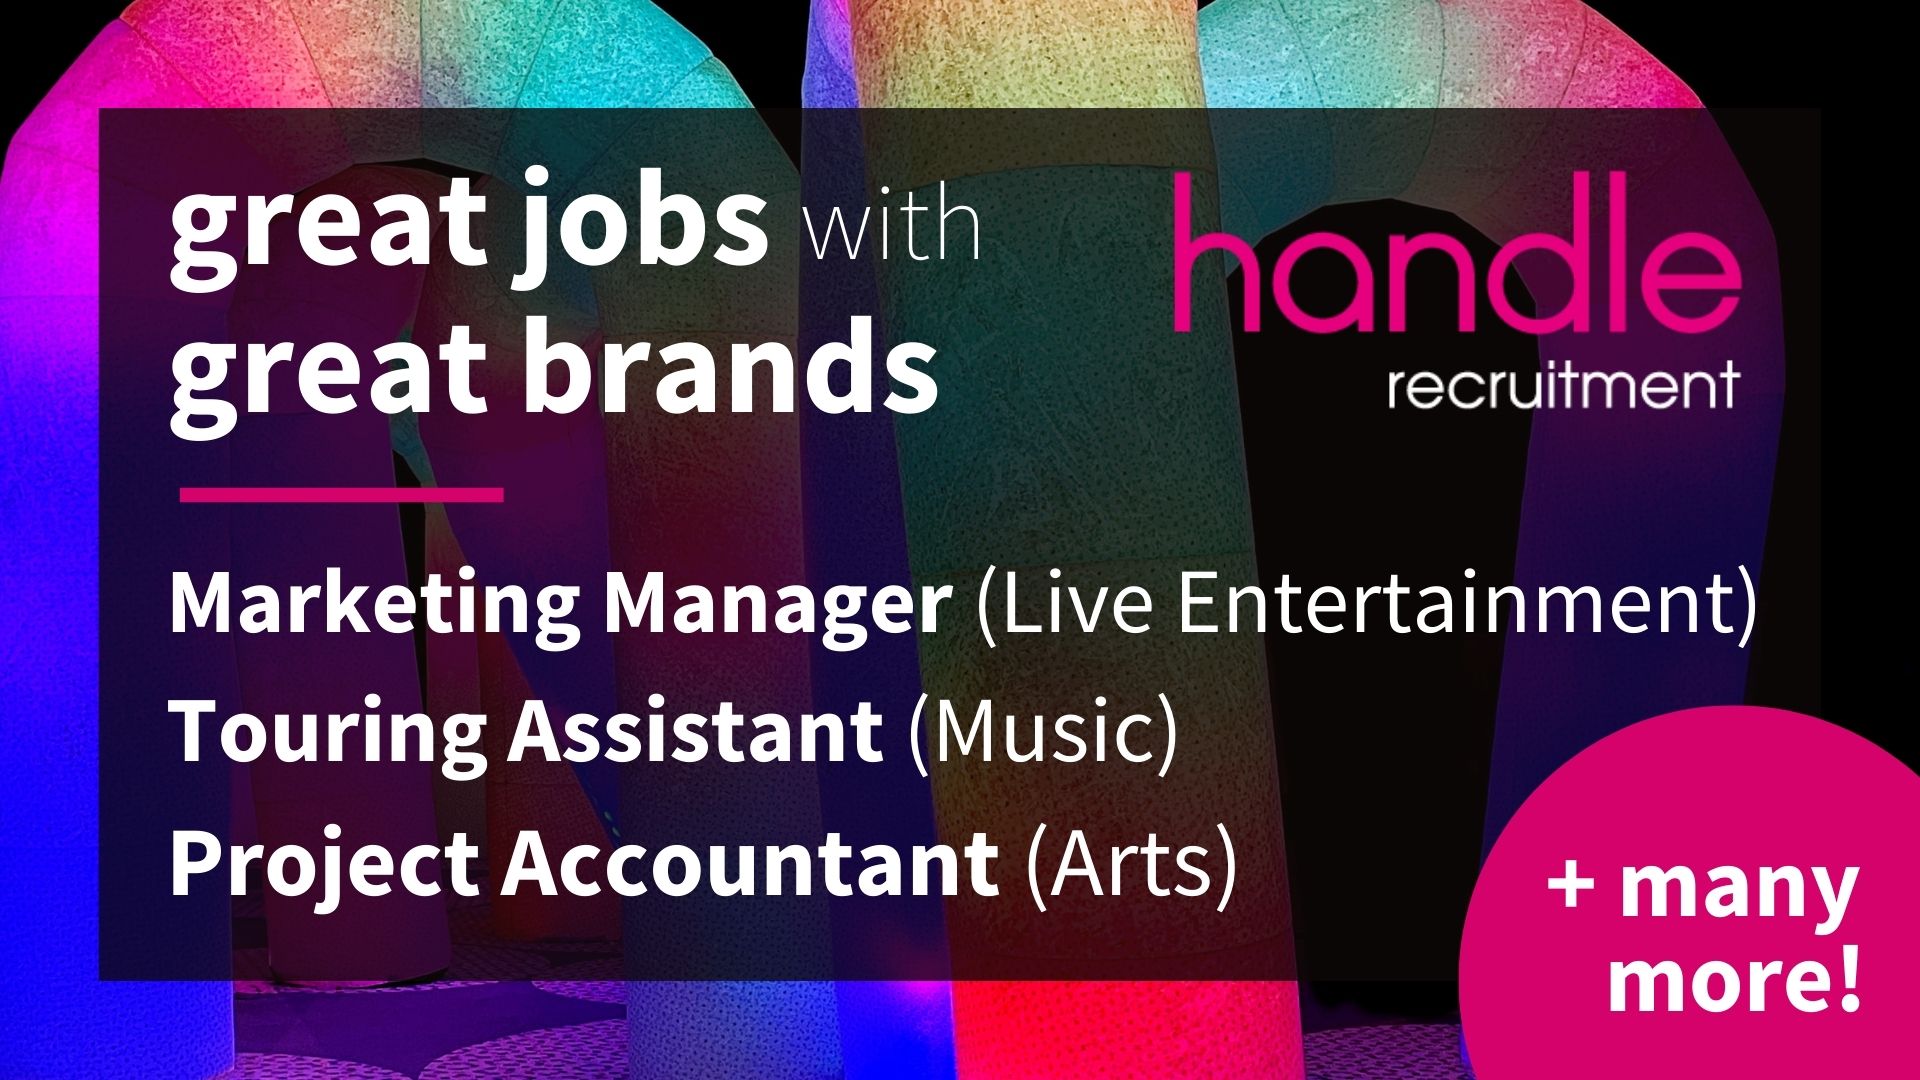 Great Jobs with Great Brands - Handle Recruitment